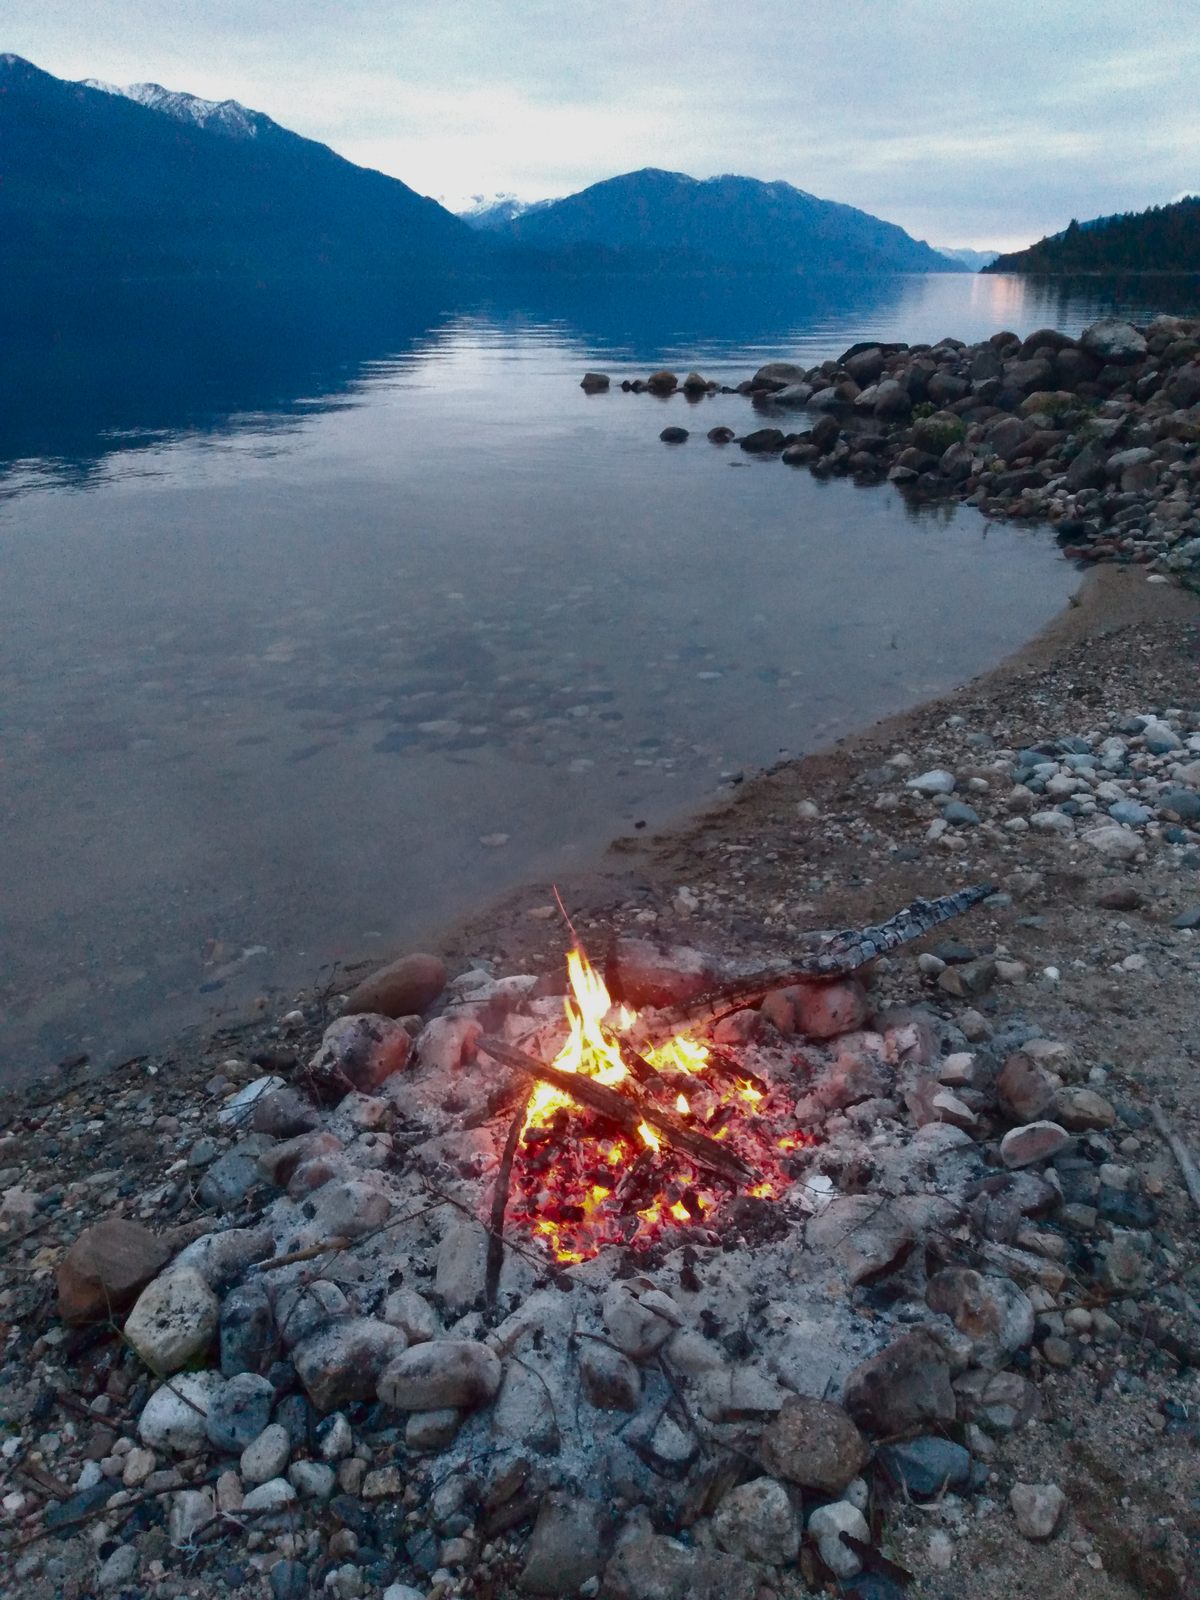 Only a few coals left in a fire next to Kootenay lake 